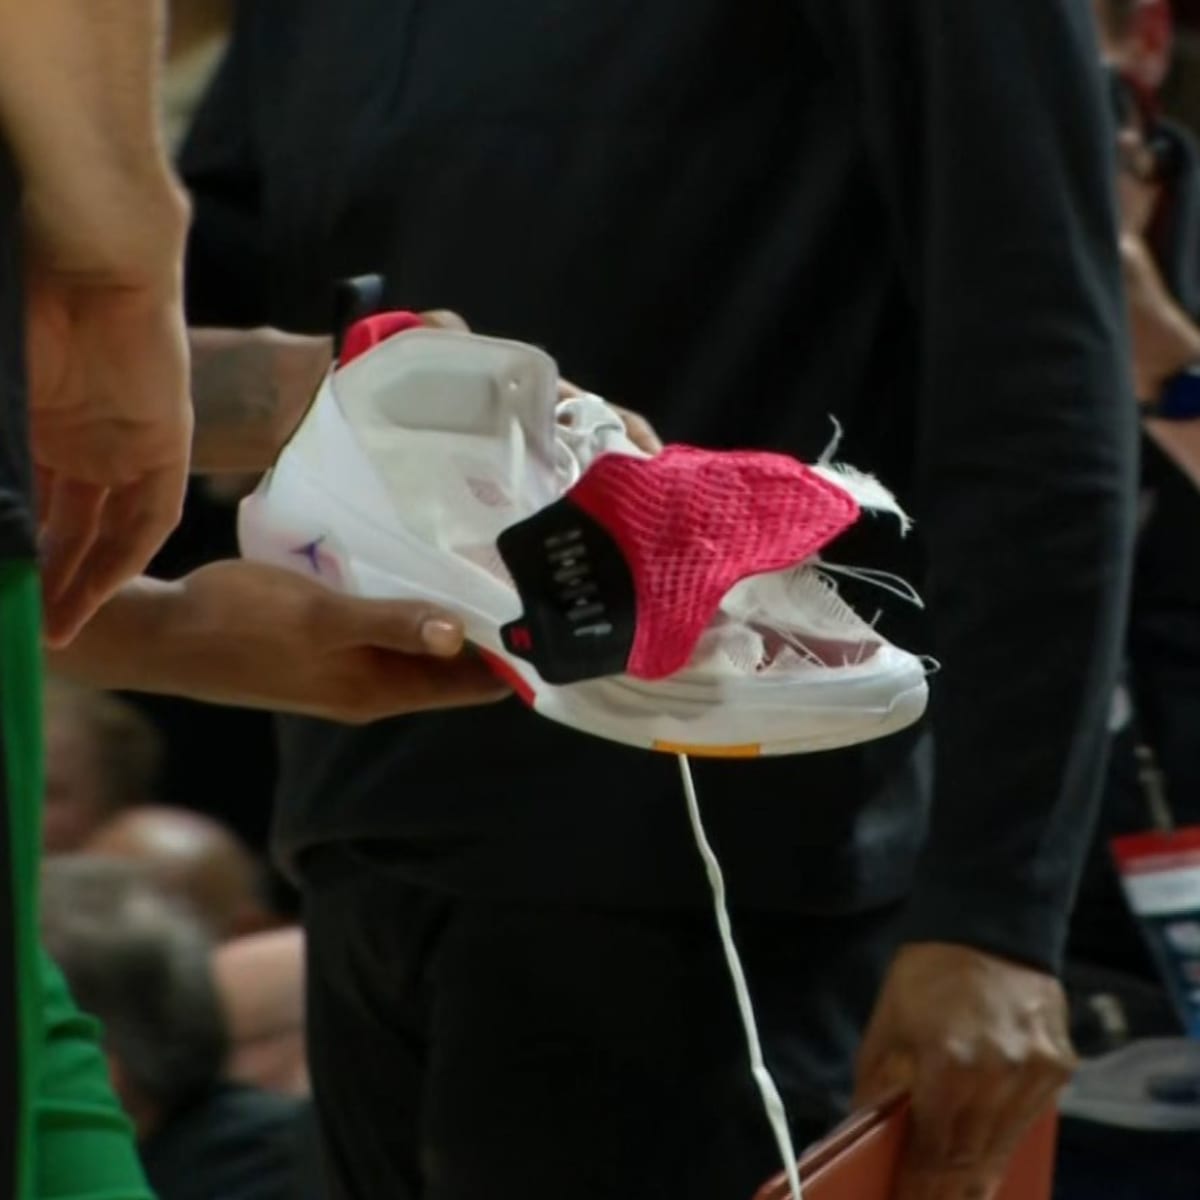 Grant Williams' shoe exploded 😳 